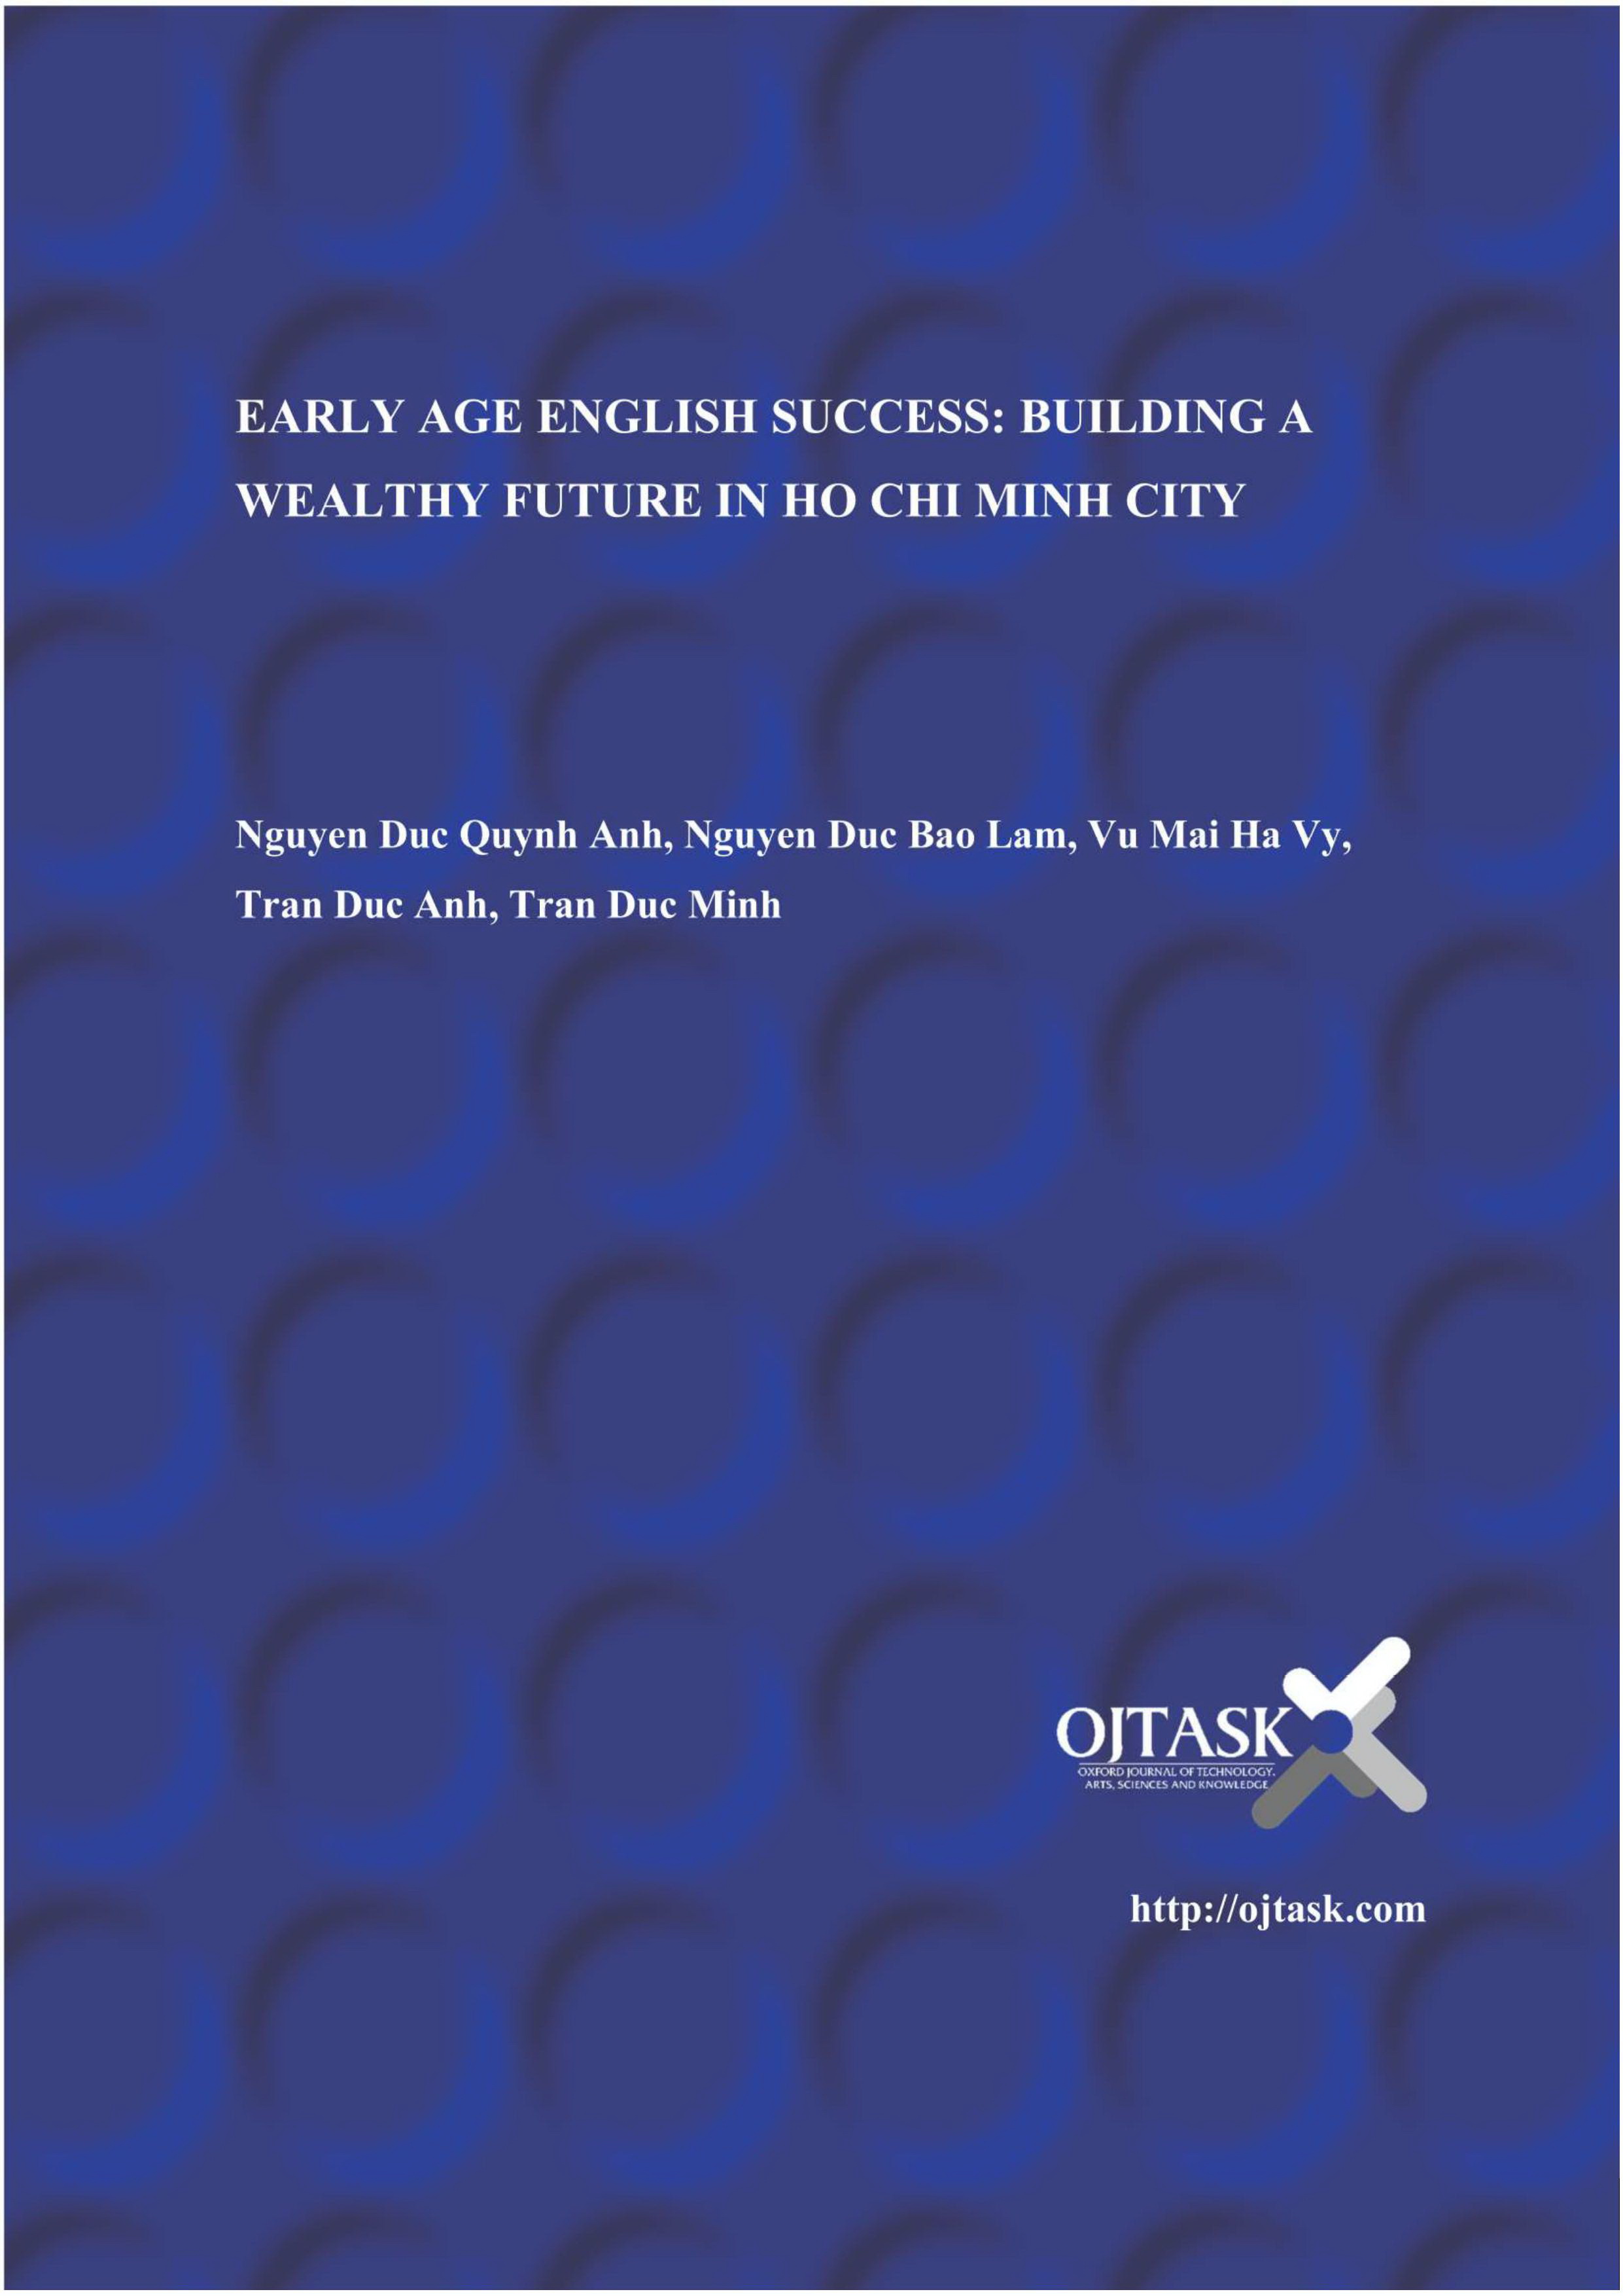 Unlocking Young Minds: Early Age English Success in Ho Chi Minh City